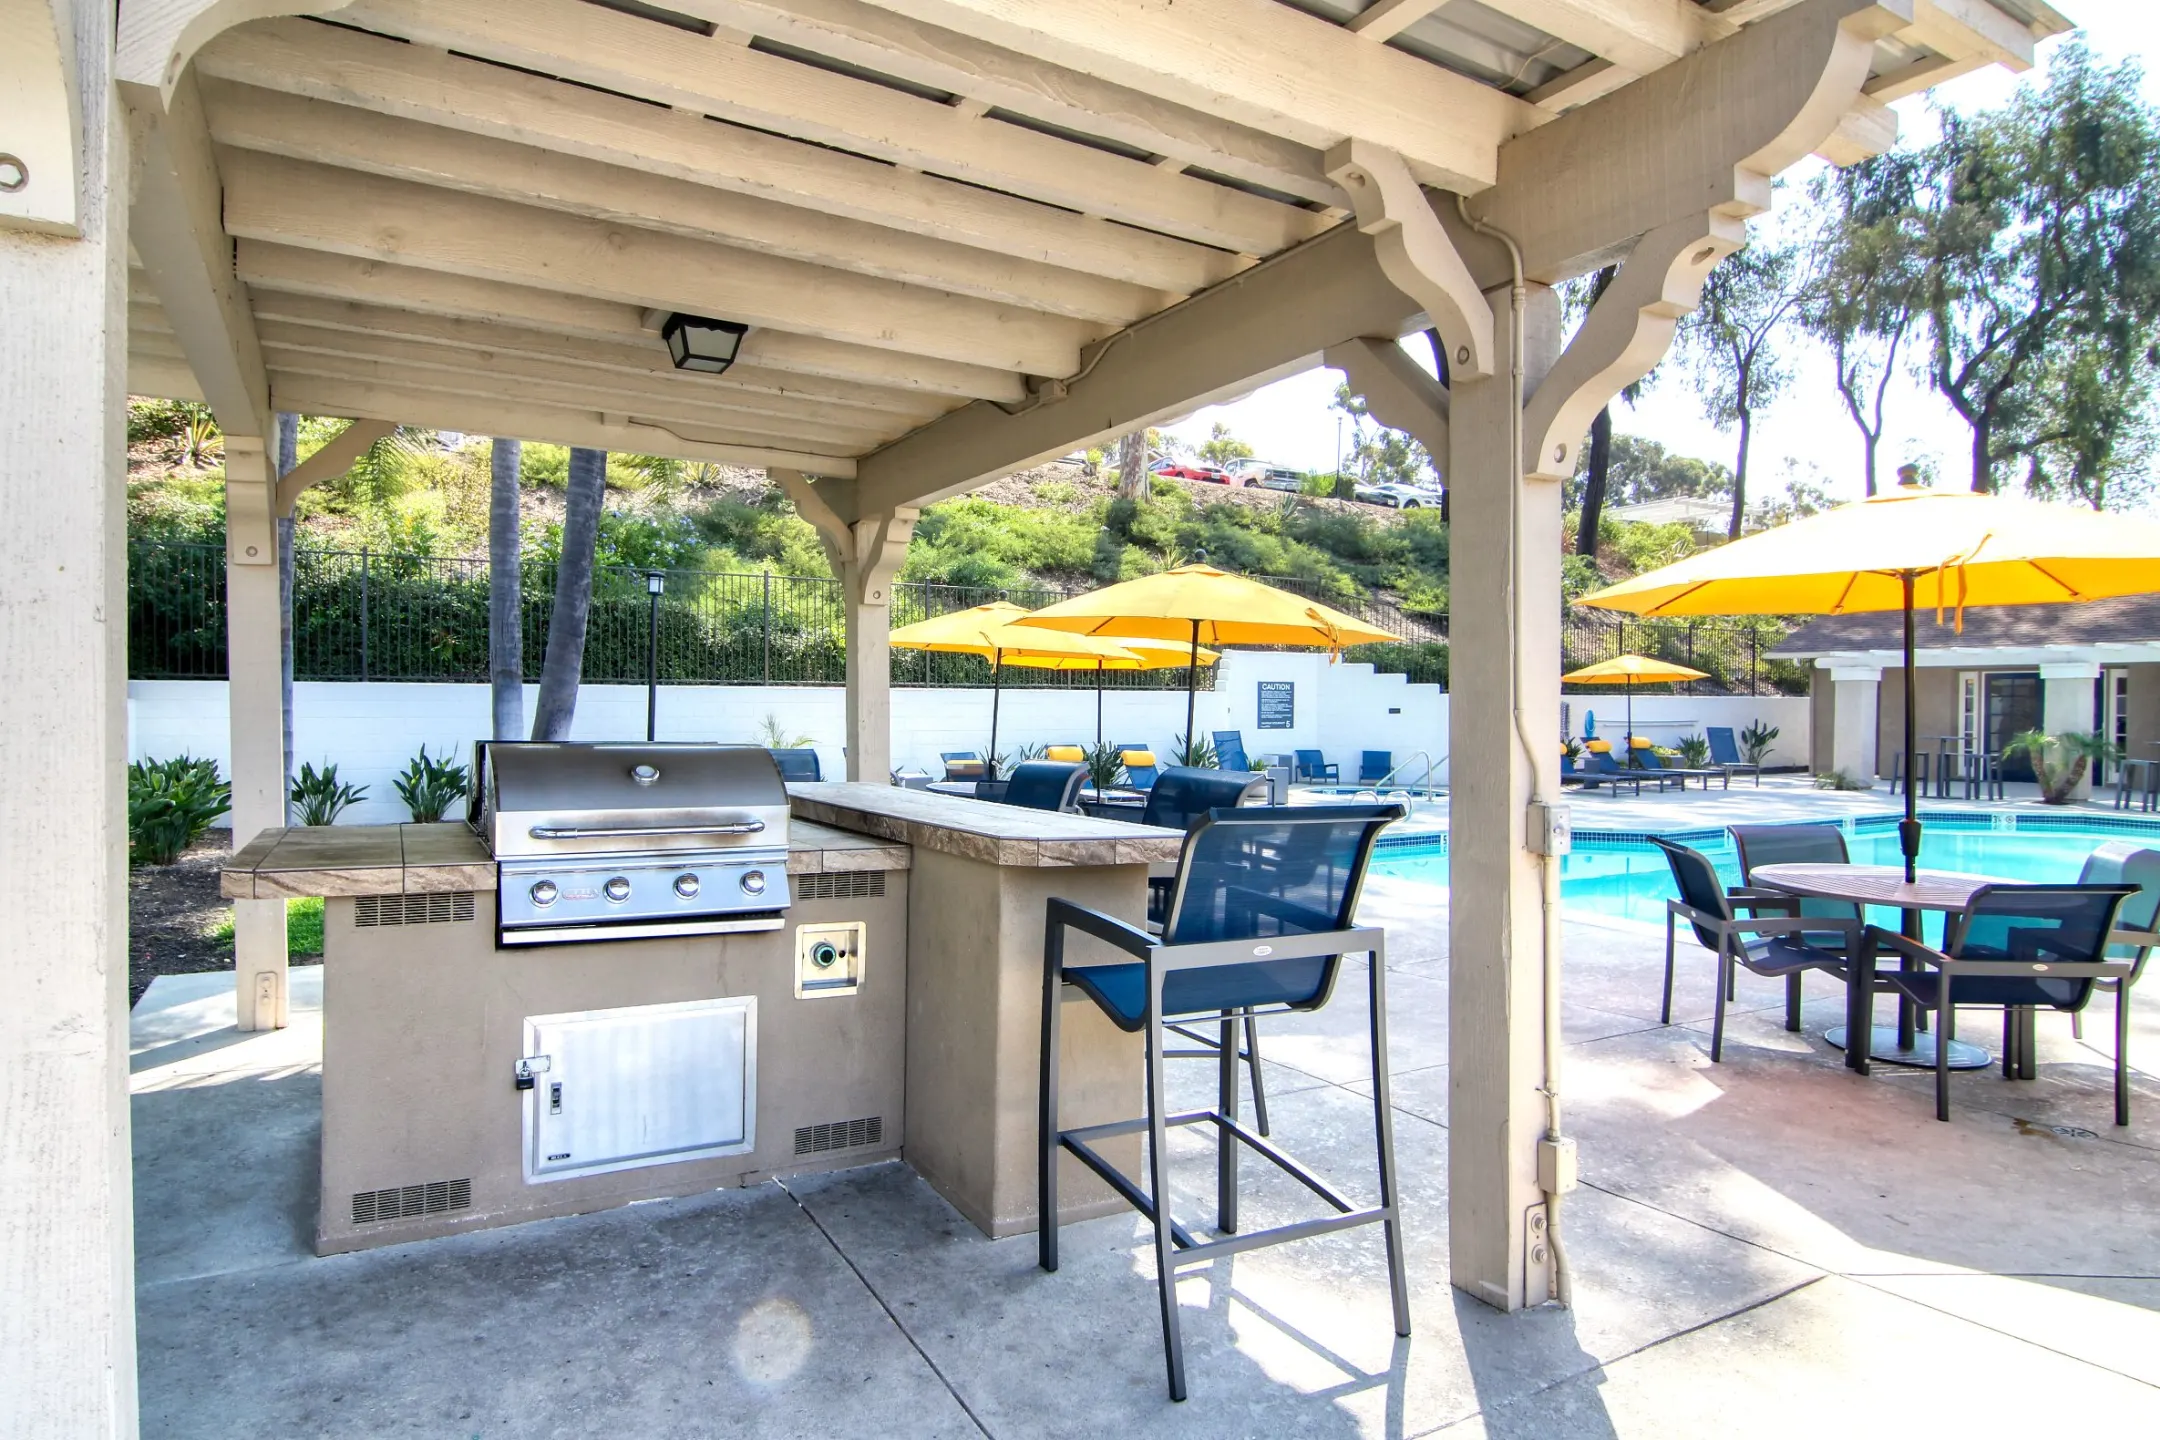 Patio / Deck - Lakeview Village - Spring Valley, CA